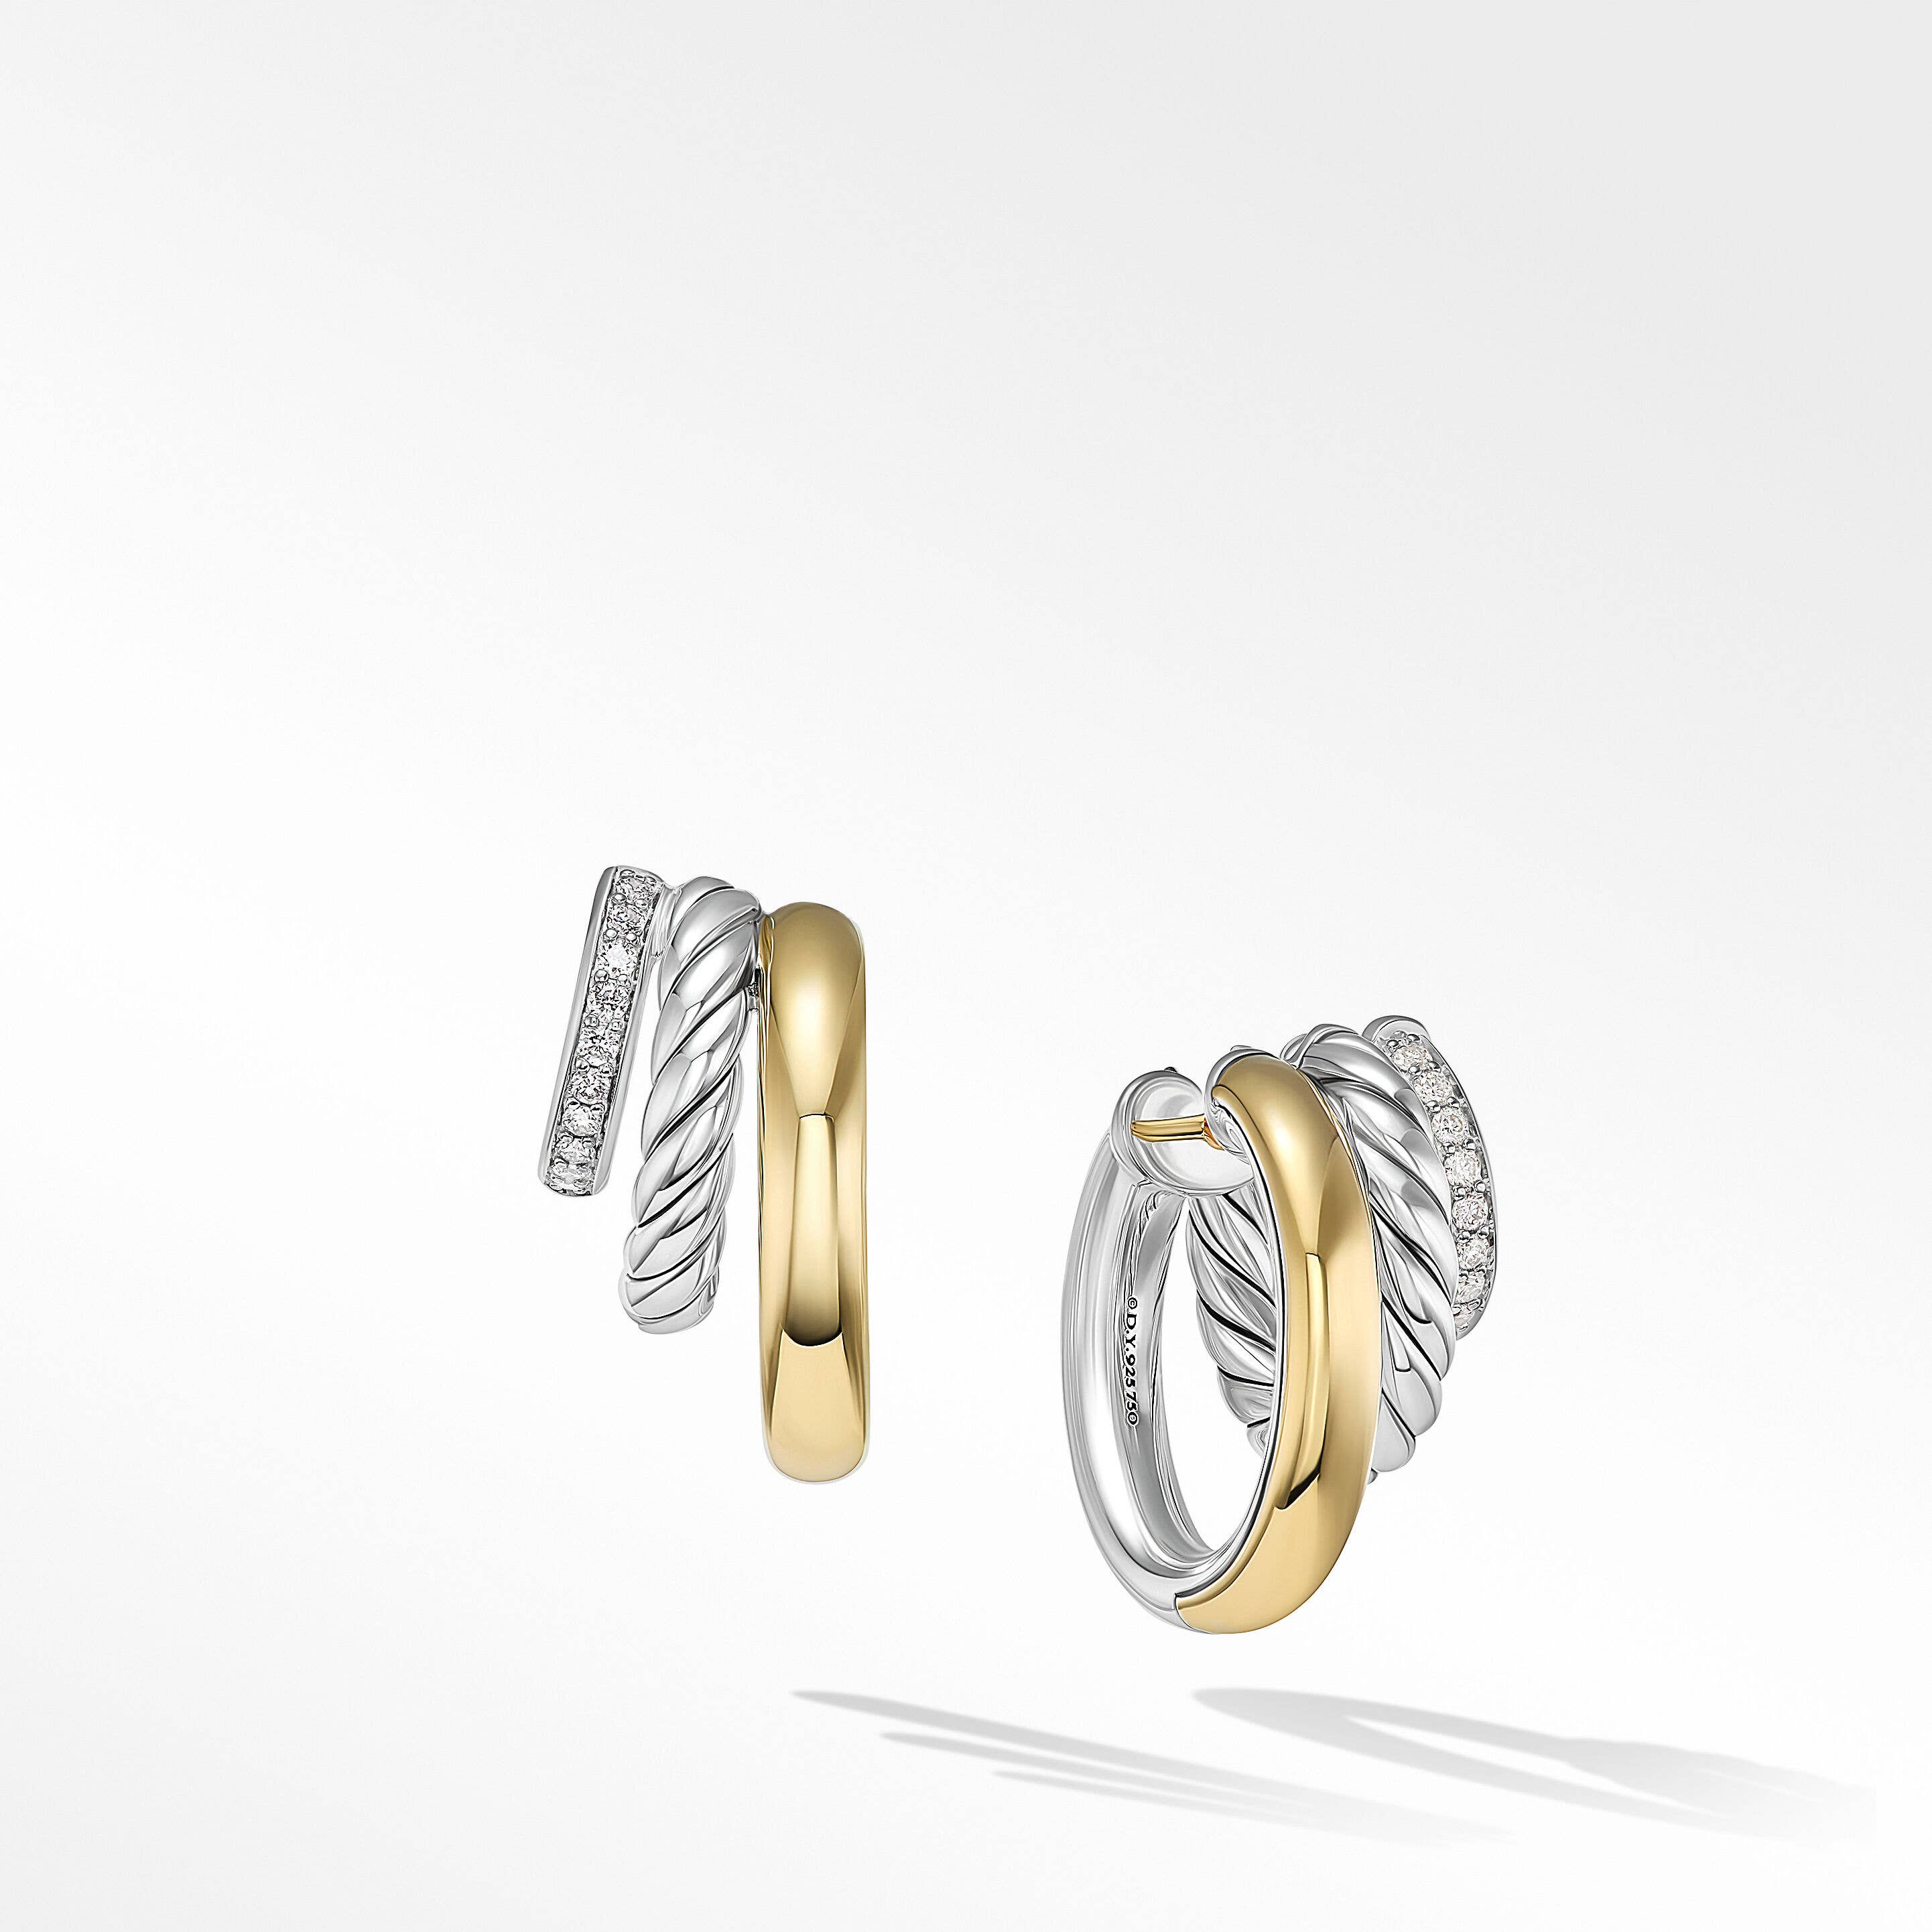 DY Mercer™ Multi Hoop Earrings in Sterling Silver with 18K Yellow Gold and Pavé Diamonds